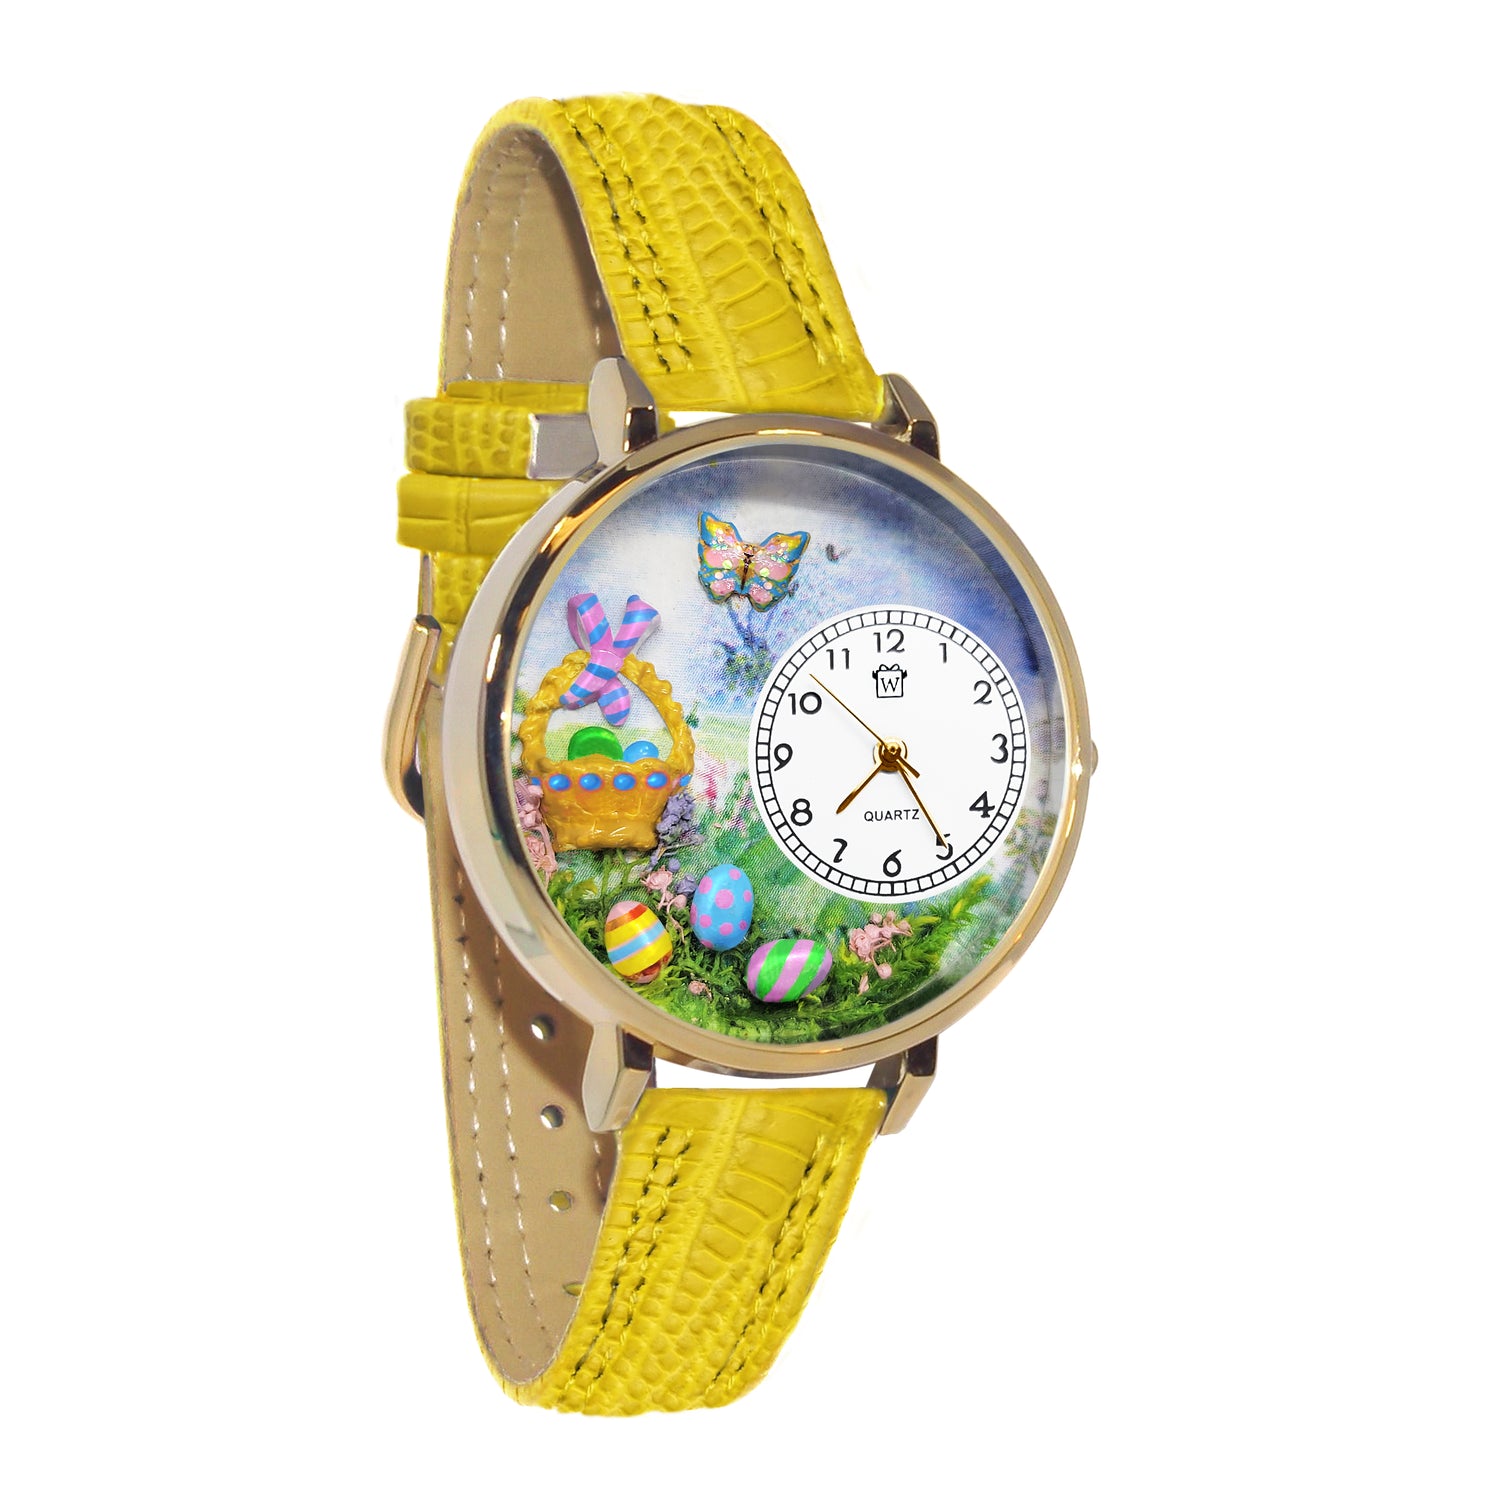 Whimsical Gifts | Easter Basket 3D Watch Large Style | Handmade in USA | Holiday & Seasonal Themed | Easter | Novelty Unique Fun Miniatures Gift | Gold Finish Yellow Leather Watch Band